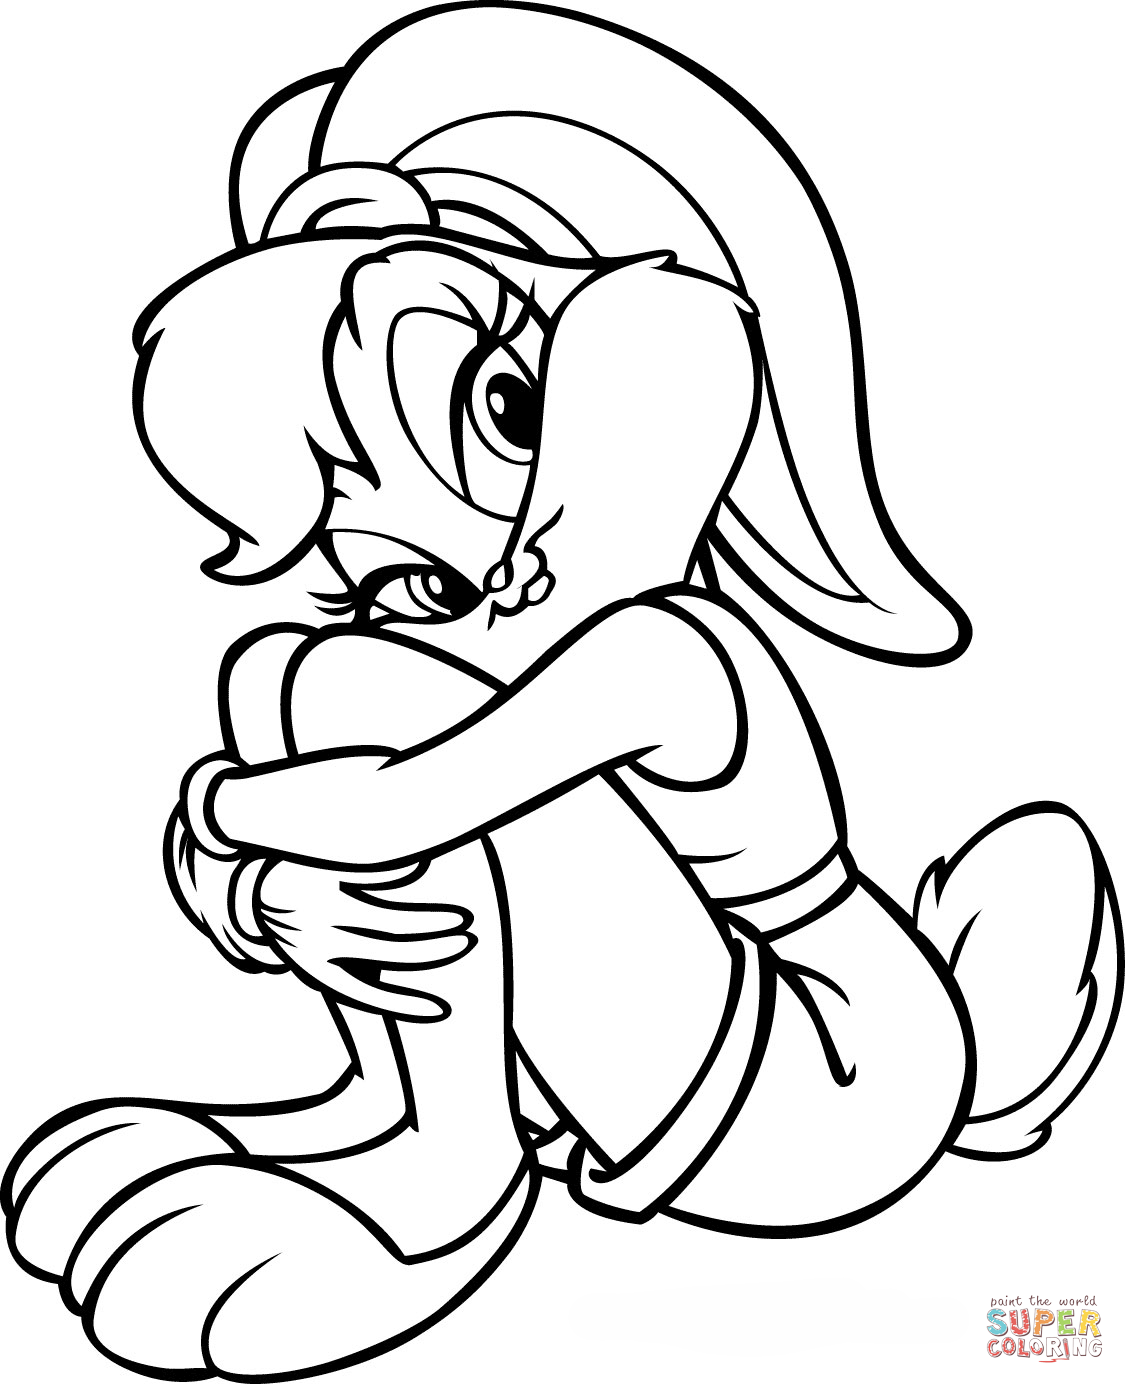 Looney tunes lola coloring page free printable coloring pages